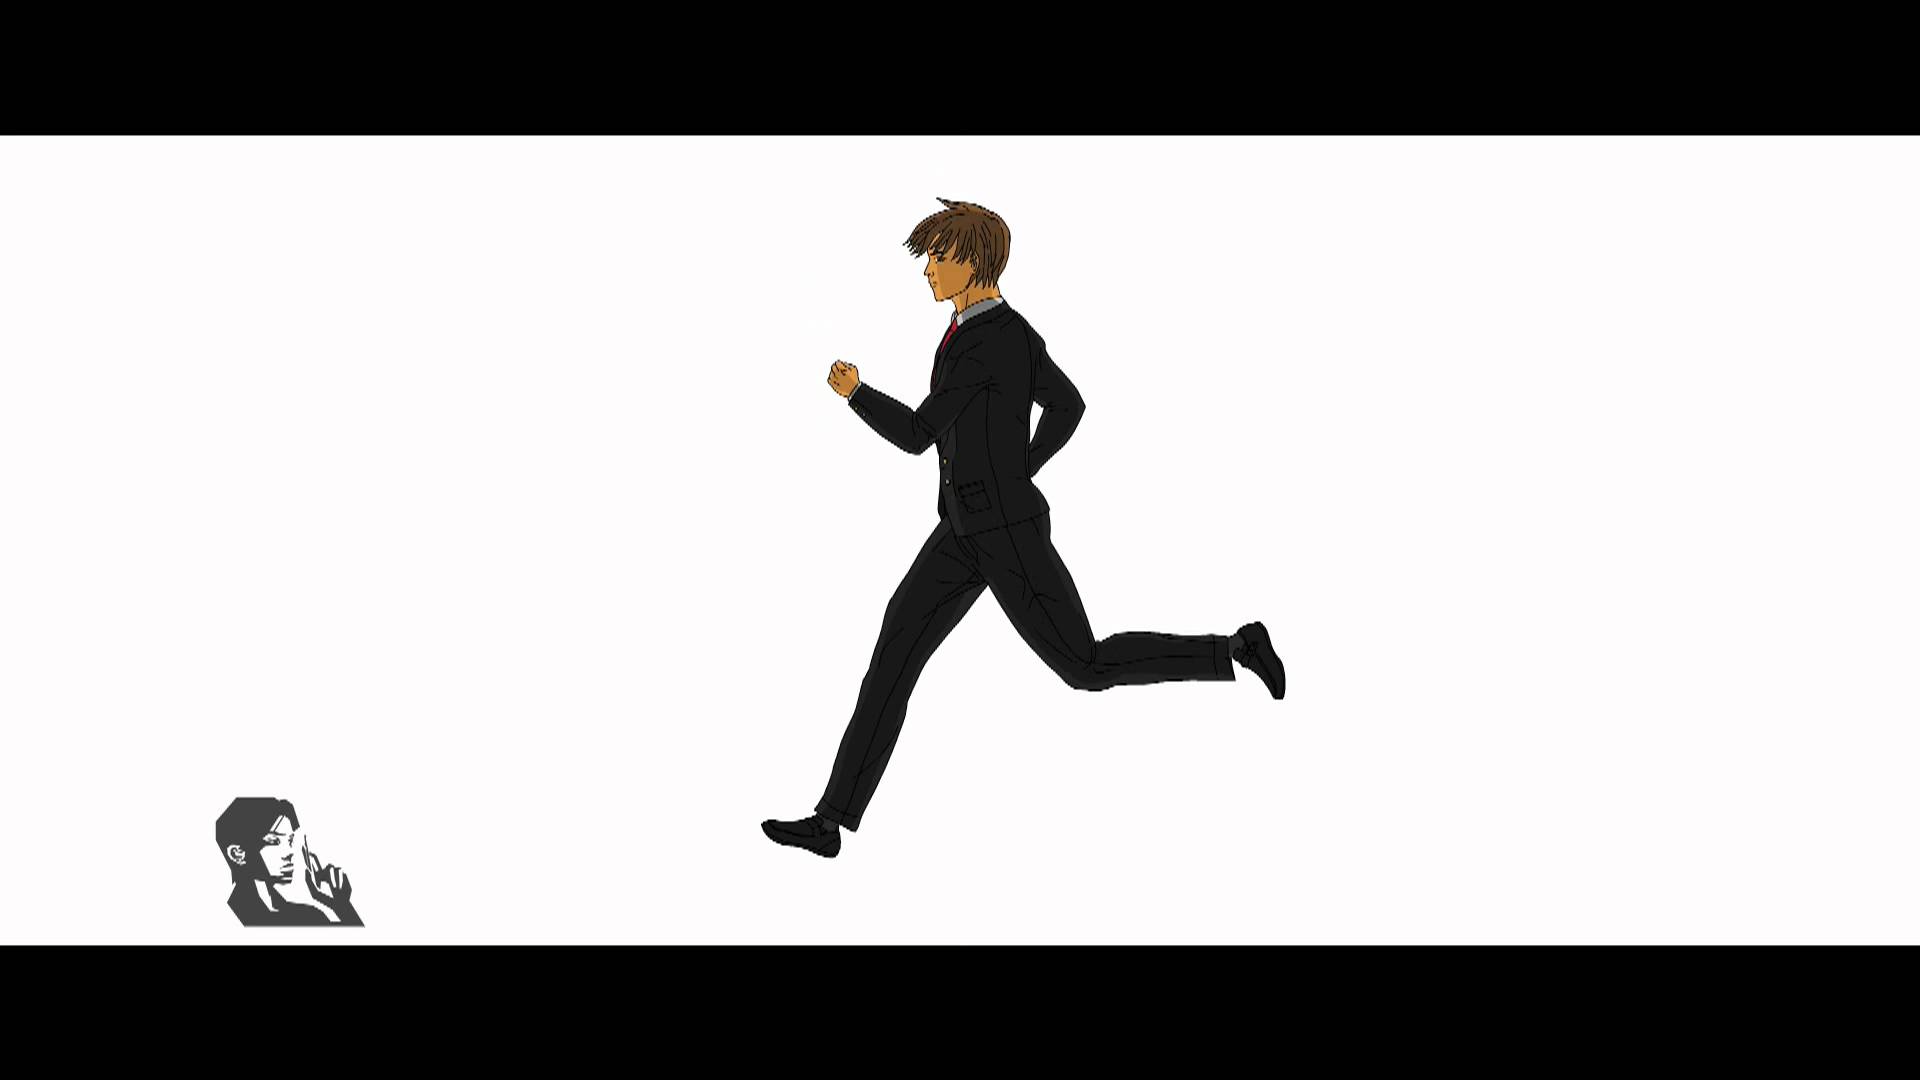 25 Best Walk Cycle Animation Videos and keyframe illustrations